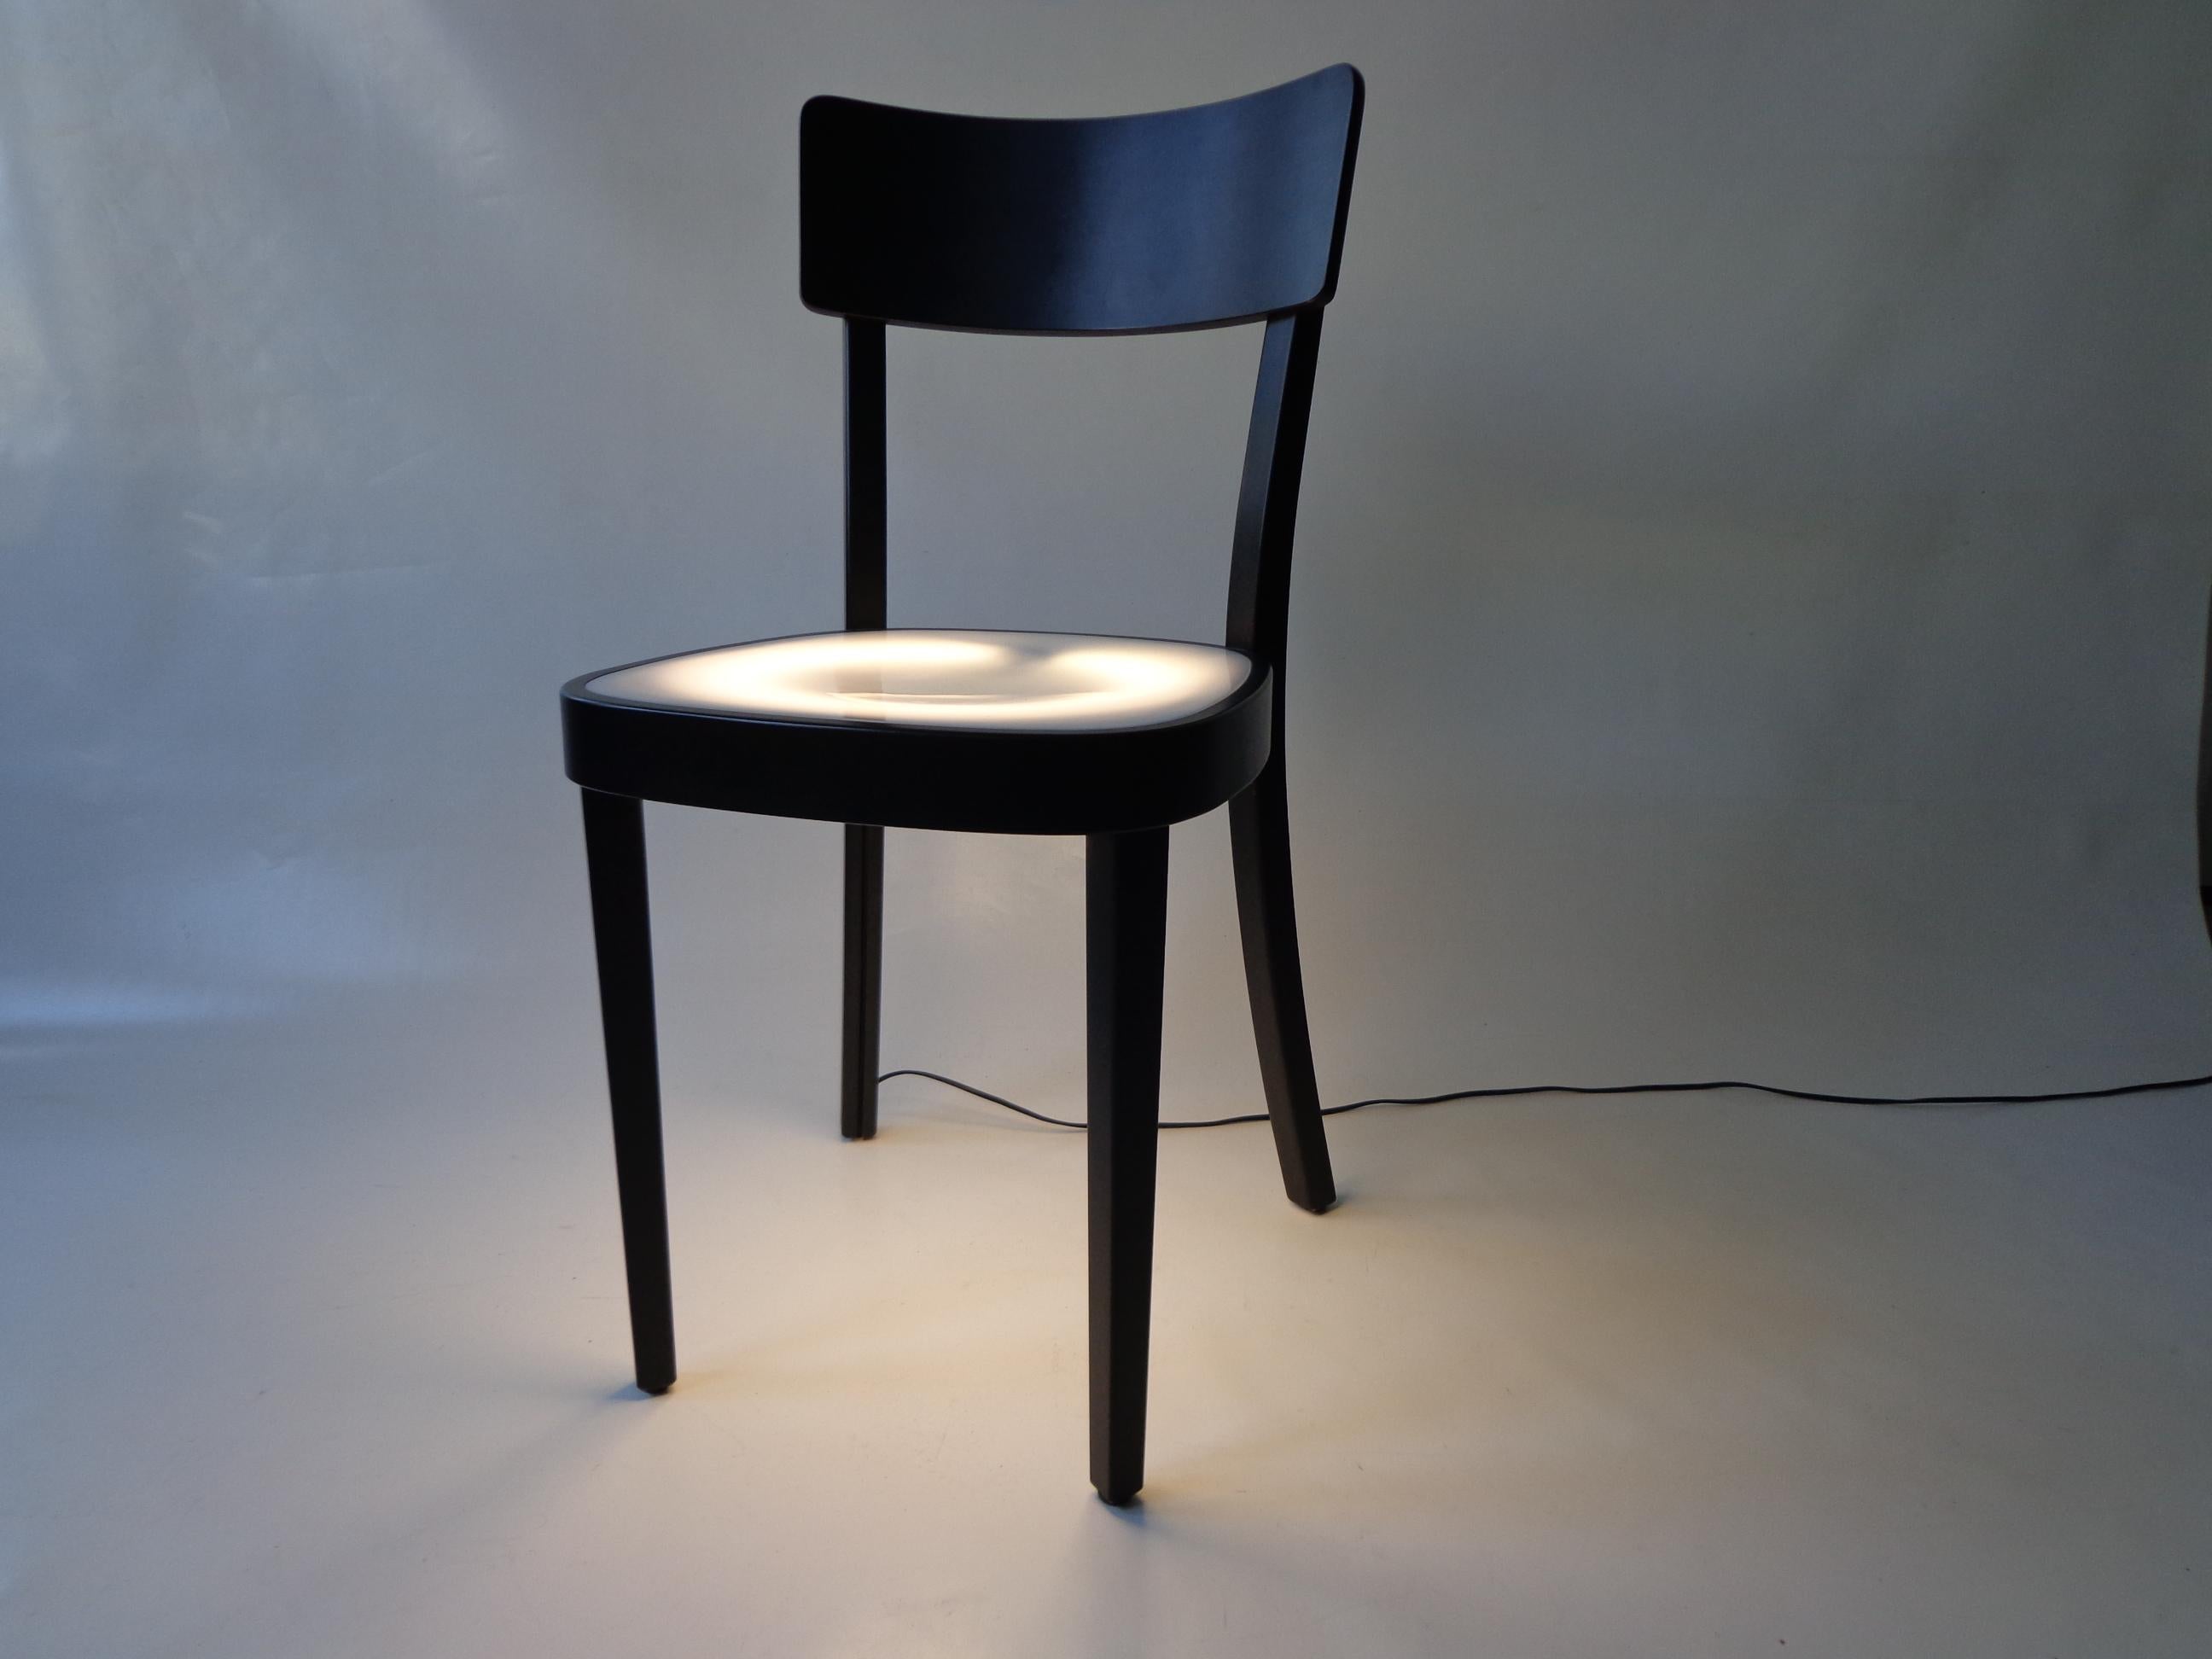 Dutch Neon Light Chair in Black-Lacquered Wood from Horgen Glarus for Hidden, 2000s For Sale